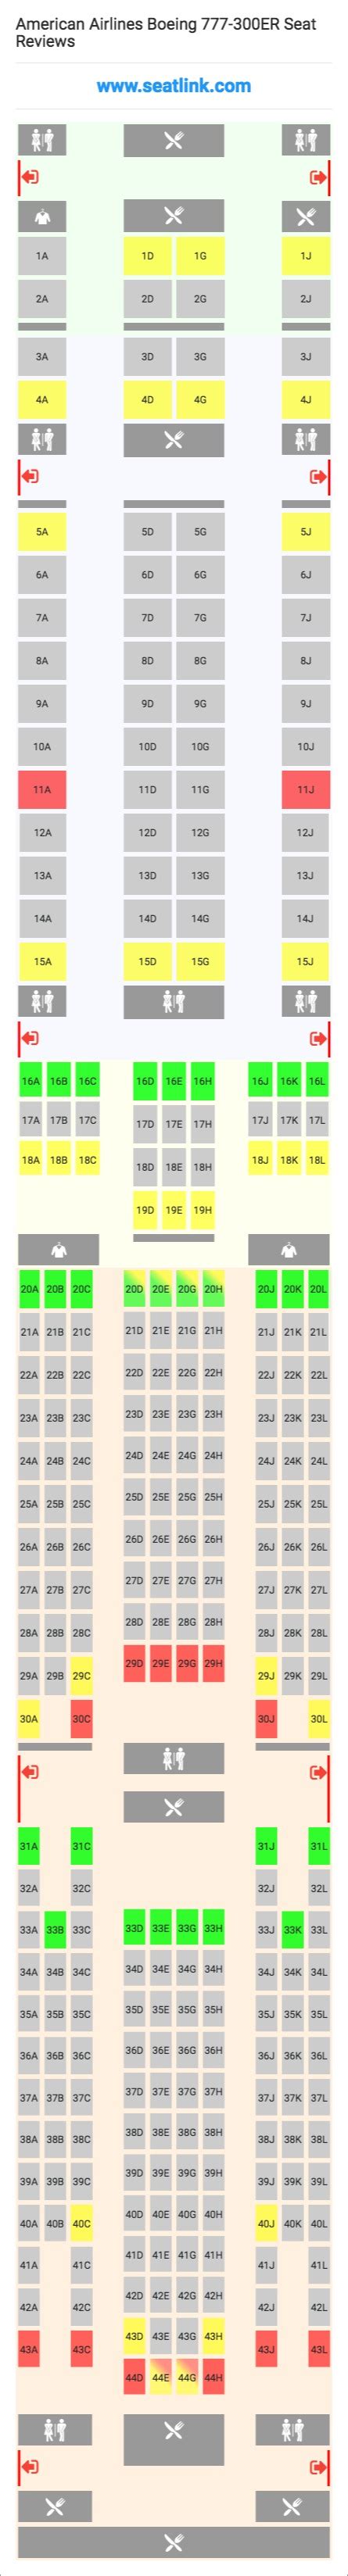 American Airlines Boeing 777 300er Seating Chart Updated January 2020